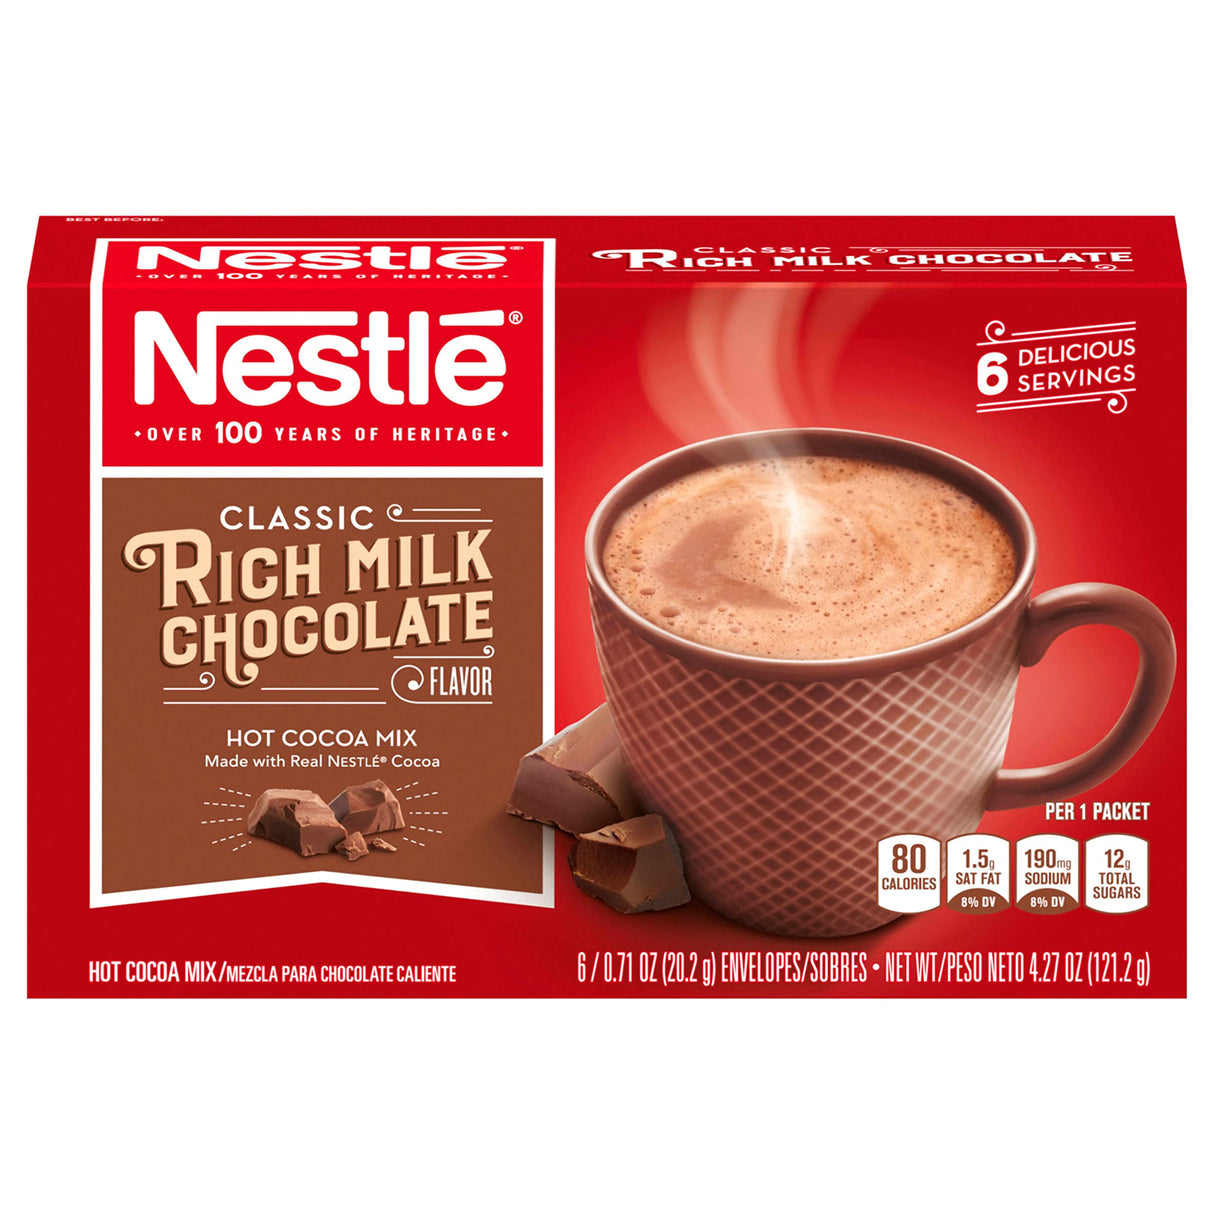 NESTLE Rich Milk Chocolate Hot Cocoa Mix 6-0.71 oz. Packets